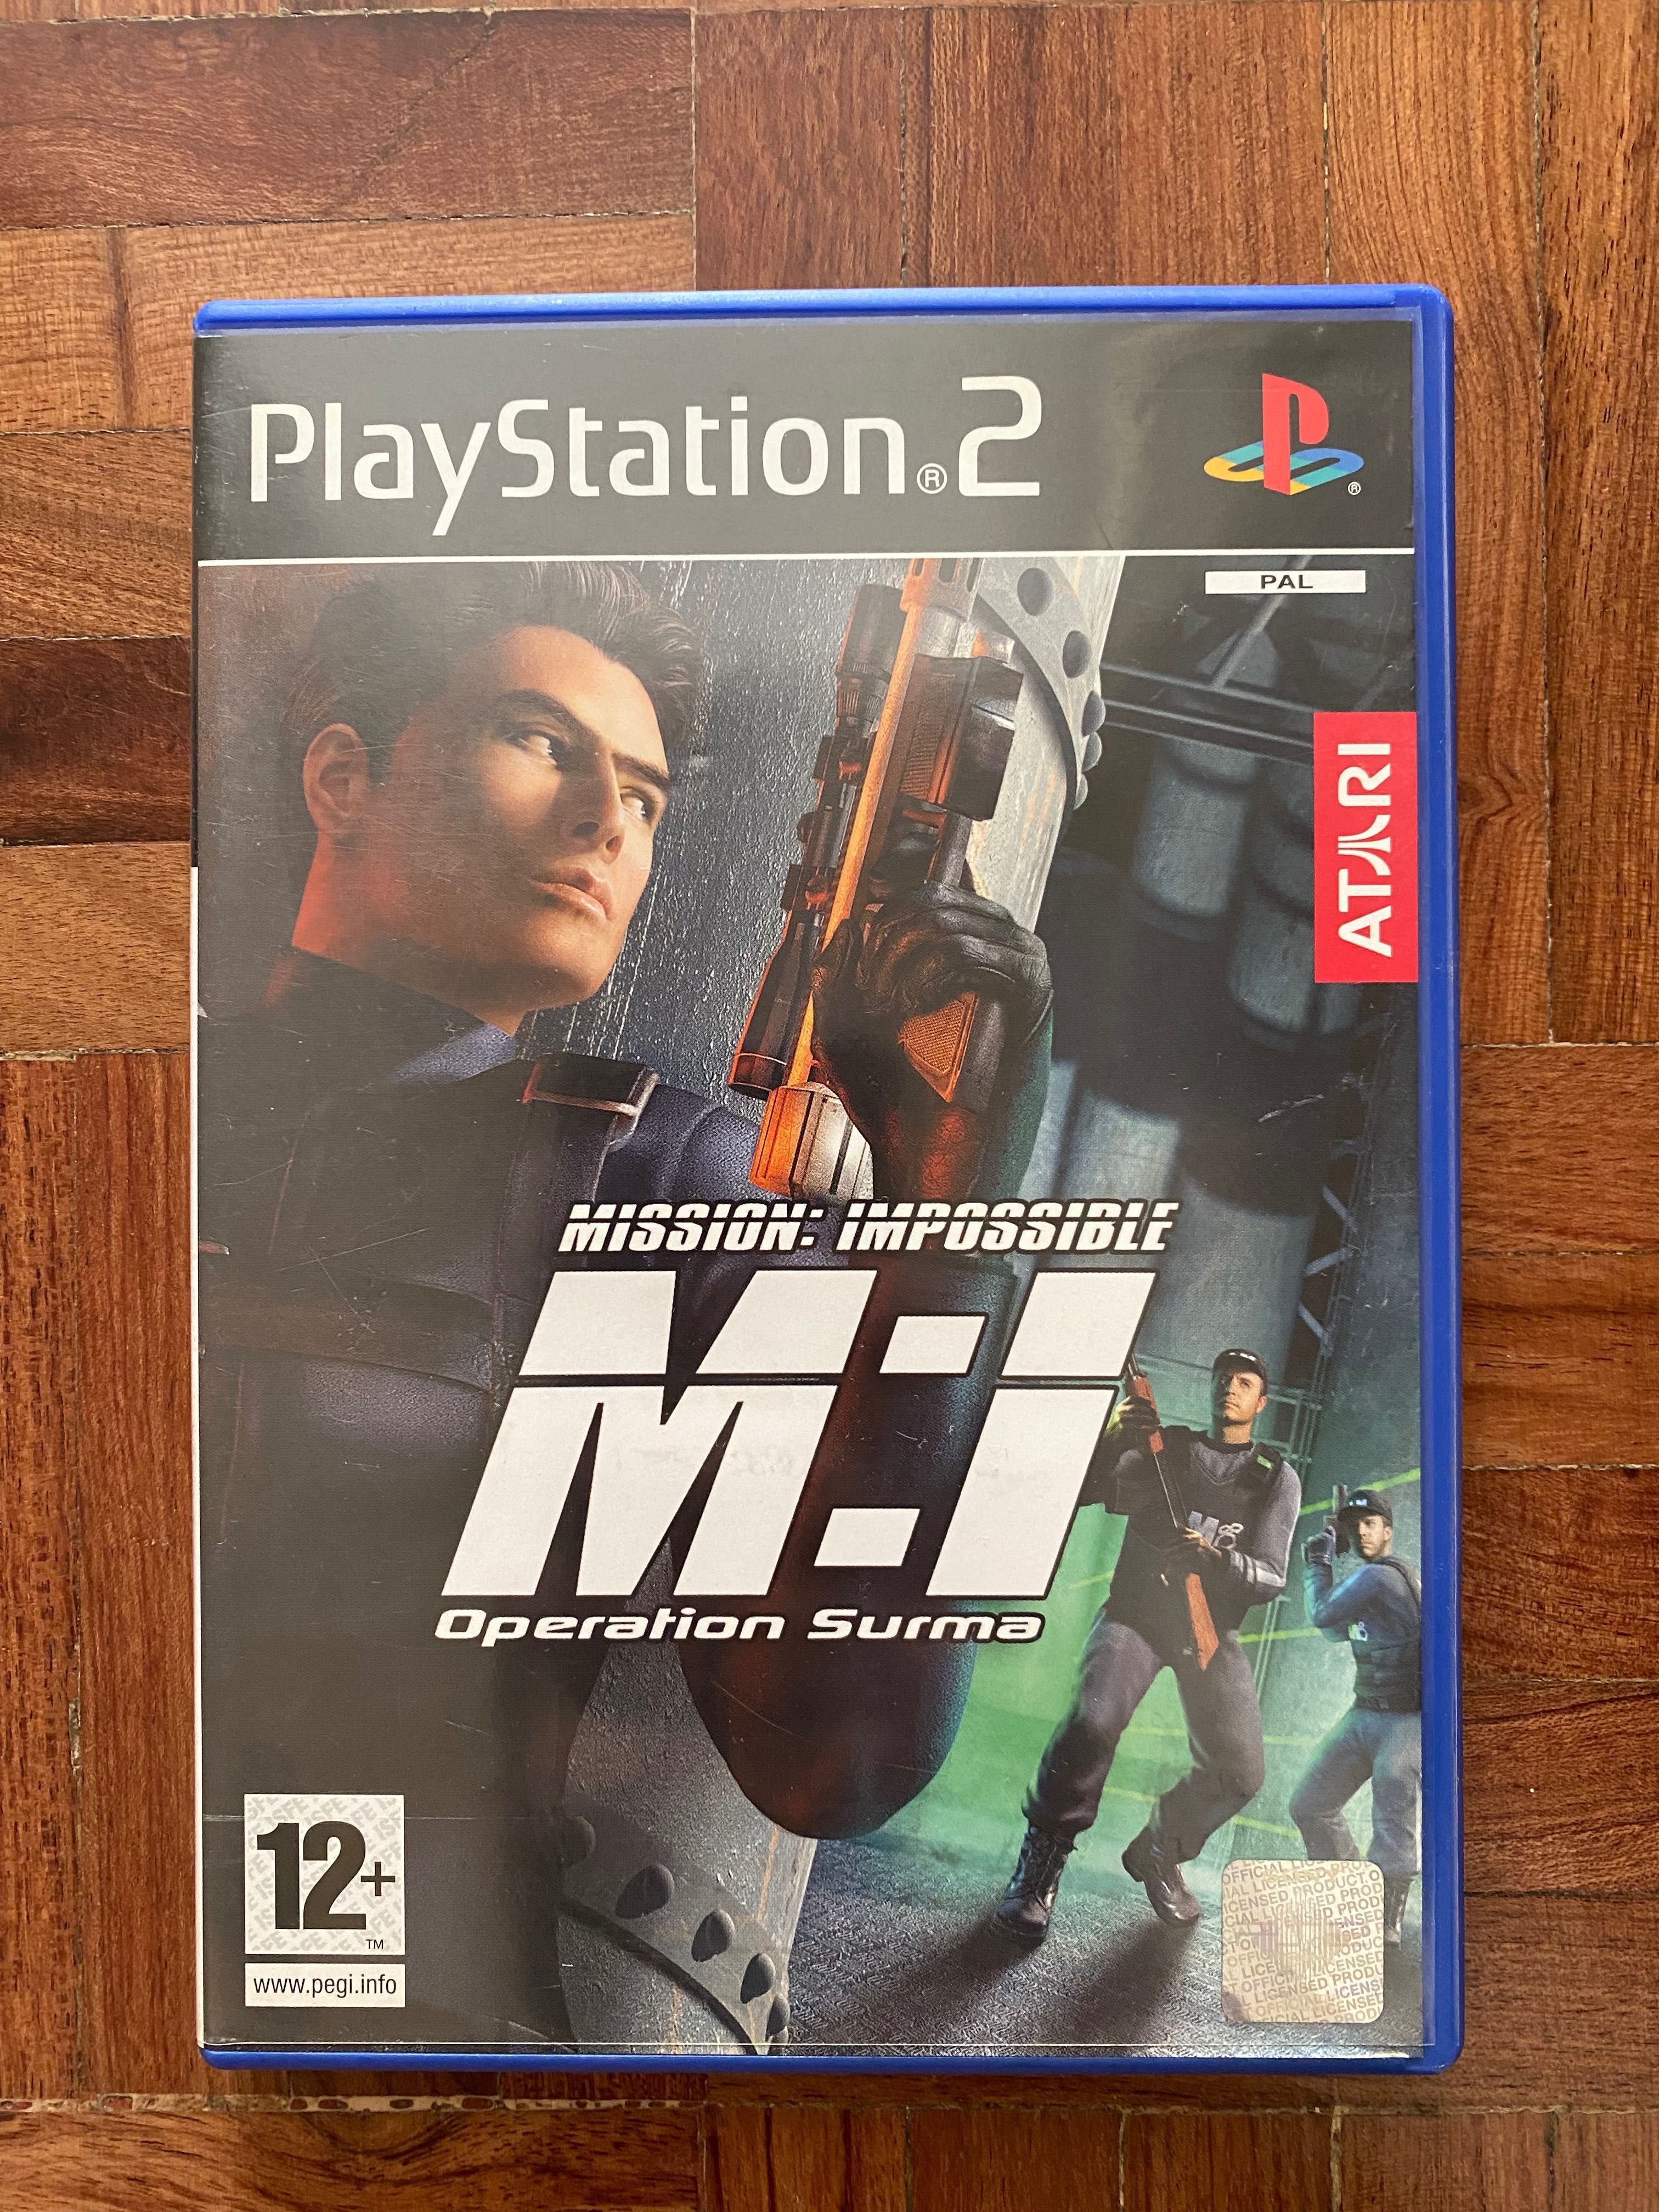 Jogo Mission Impossible Operation Surma para PS2